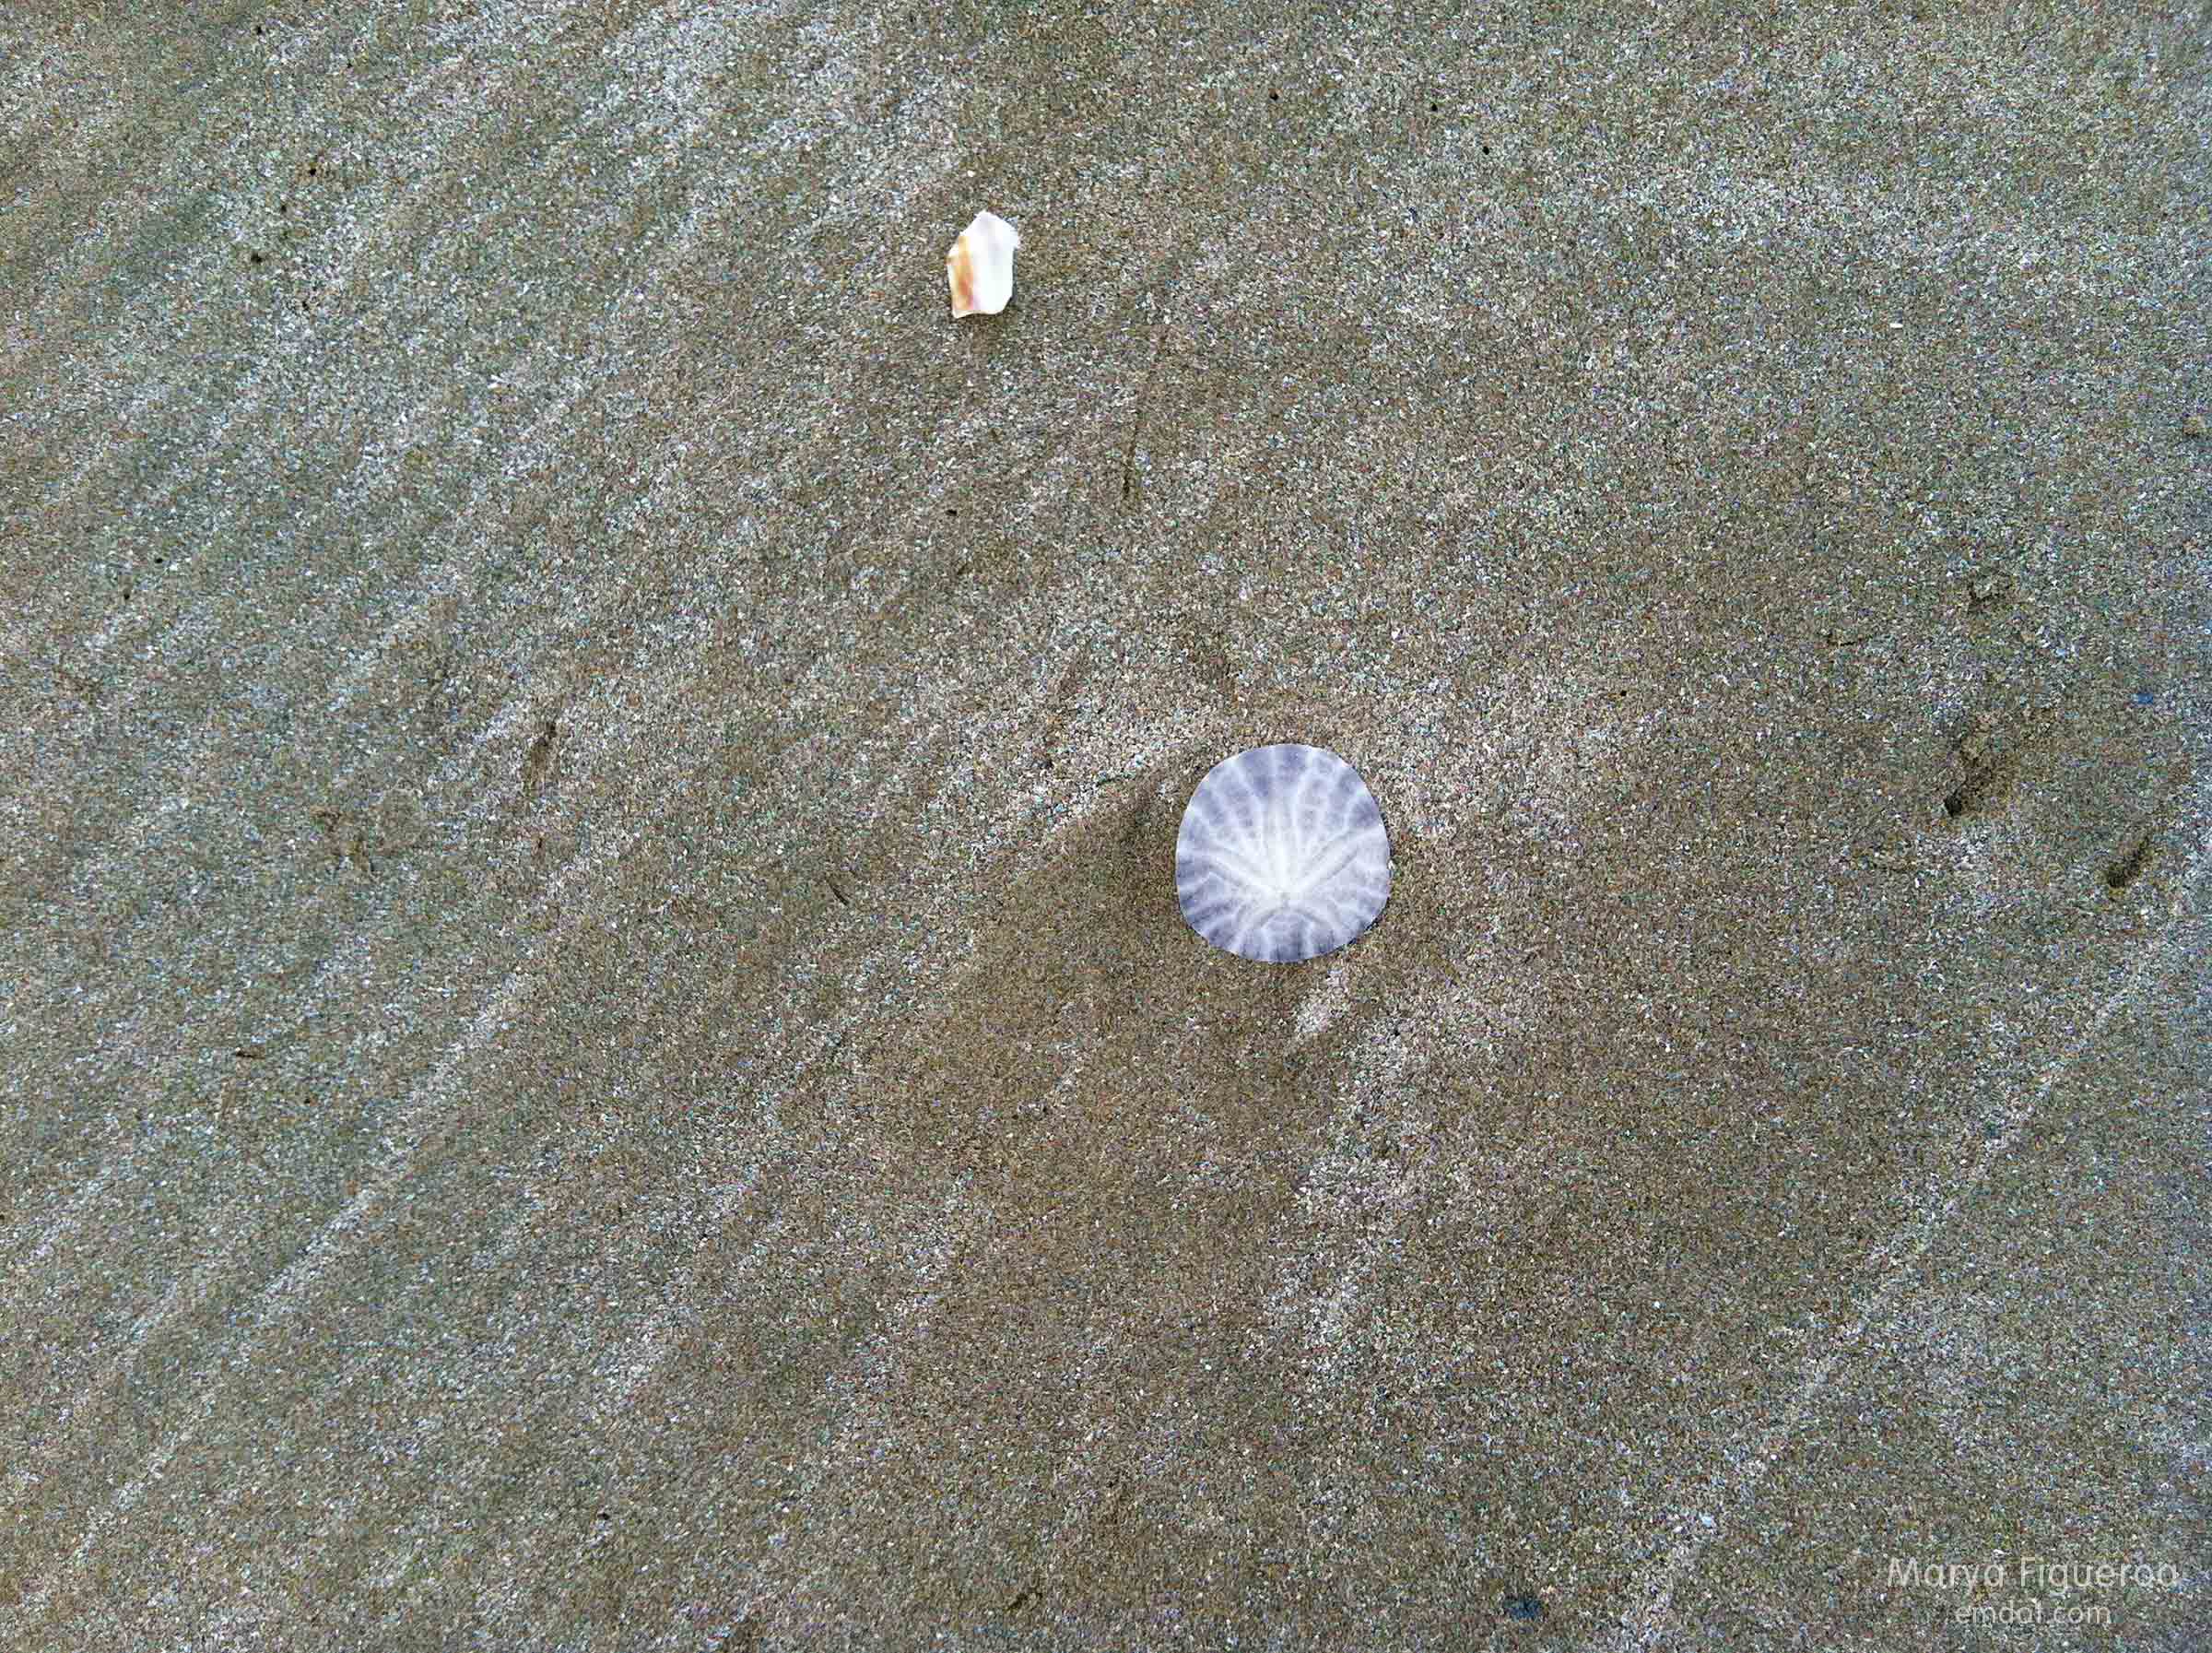 one white sand dollar with purple markings on the dark sand